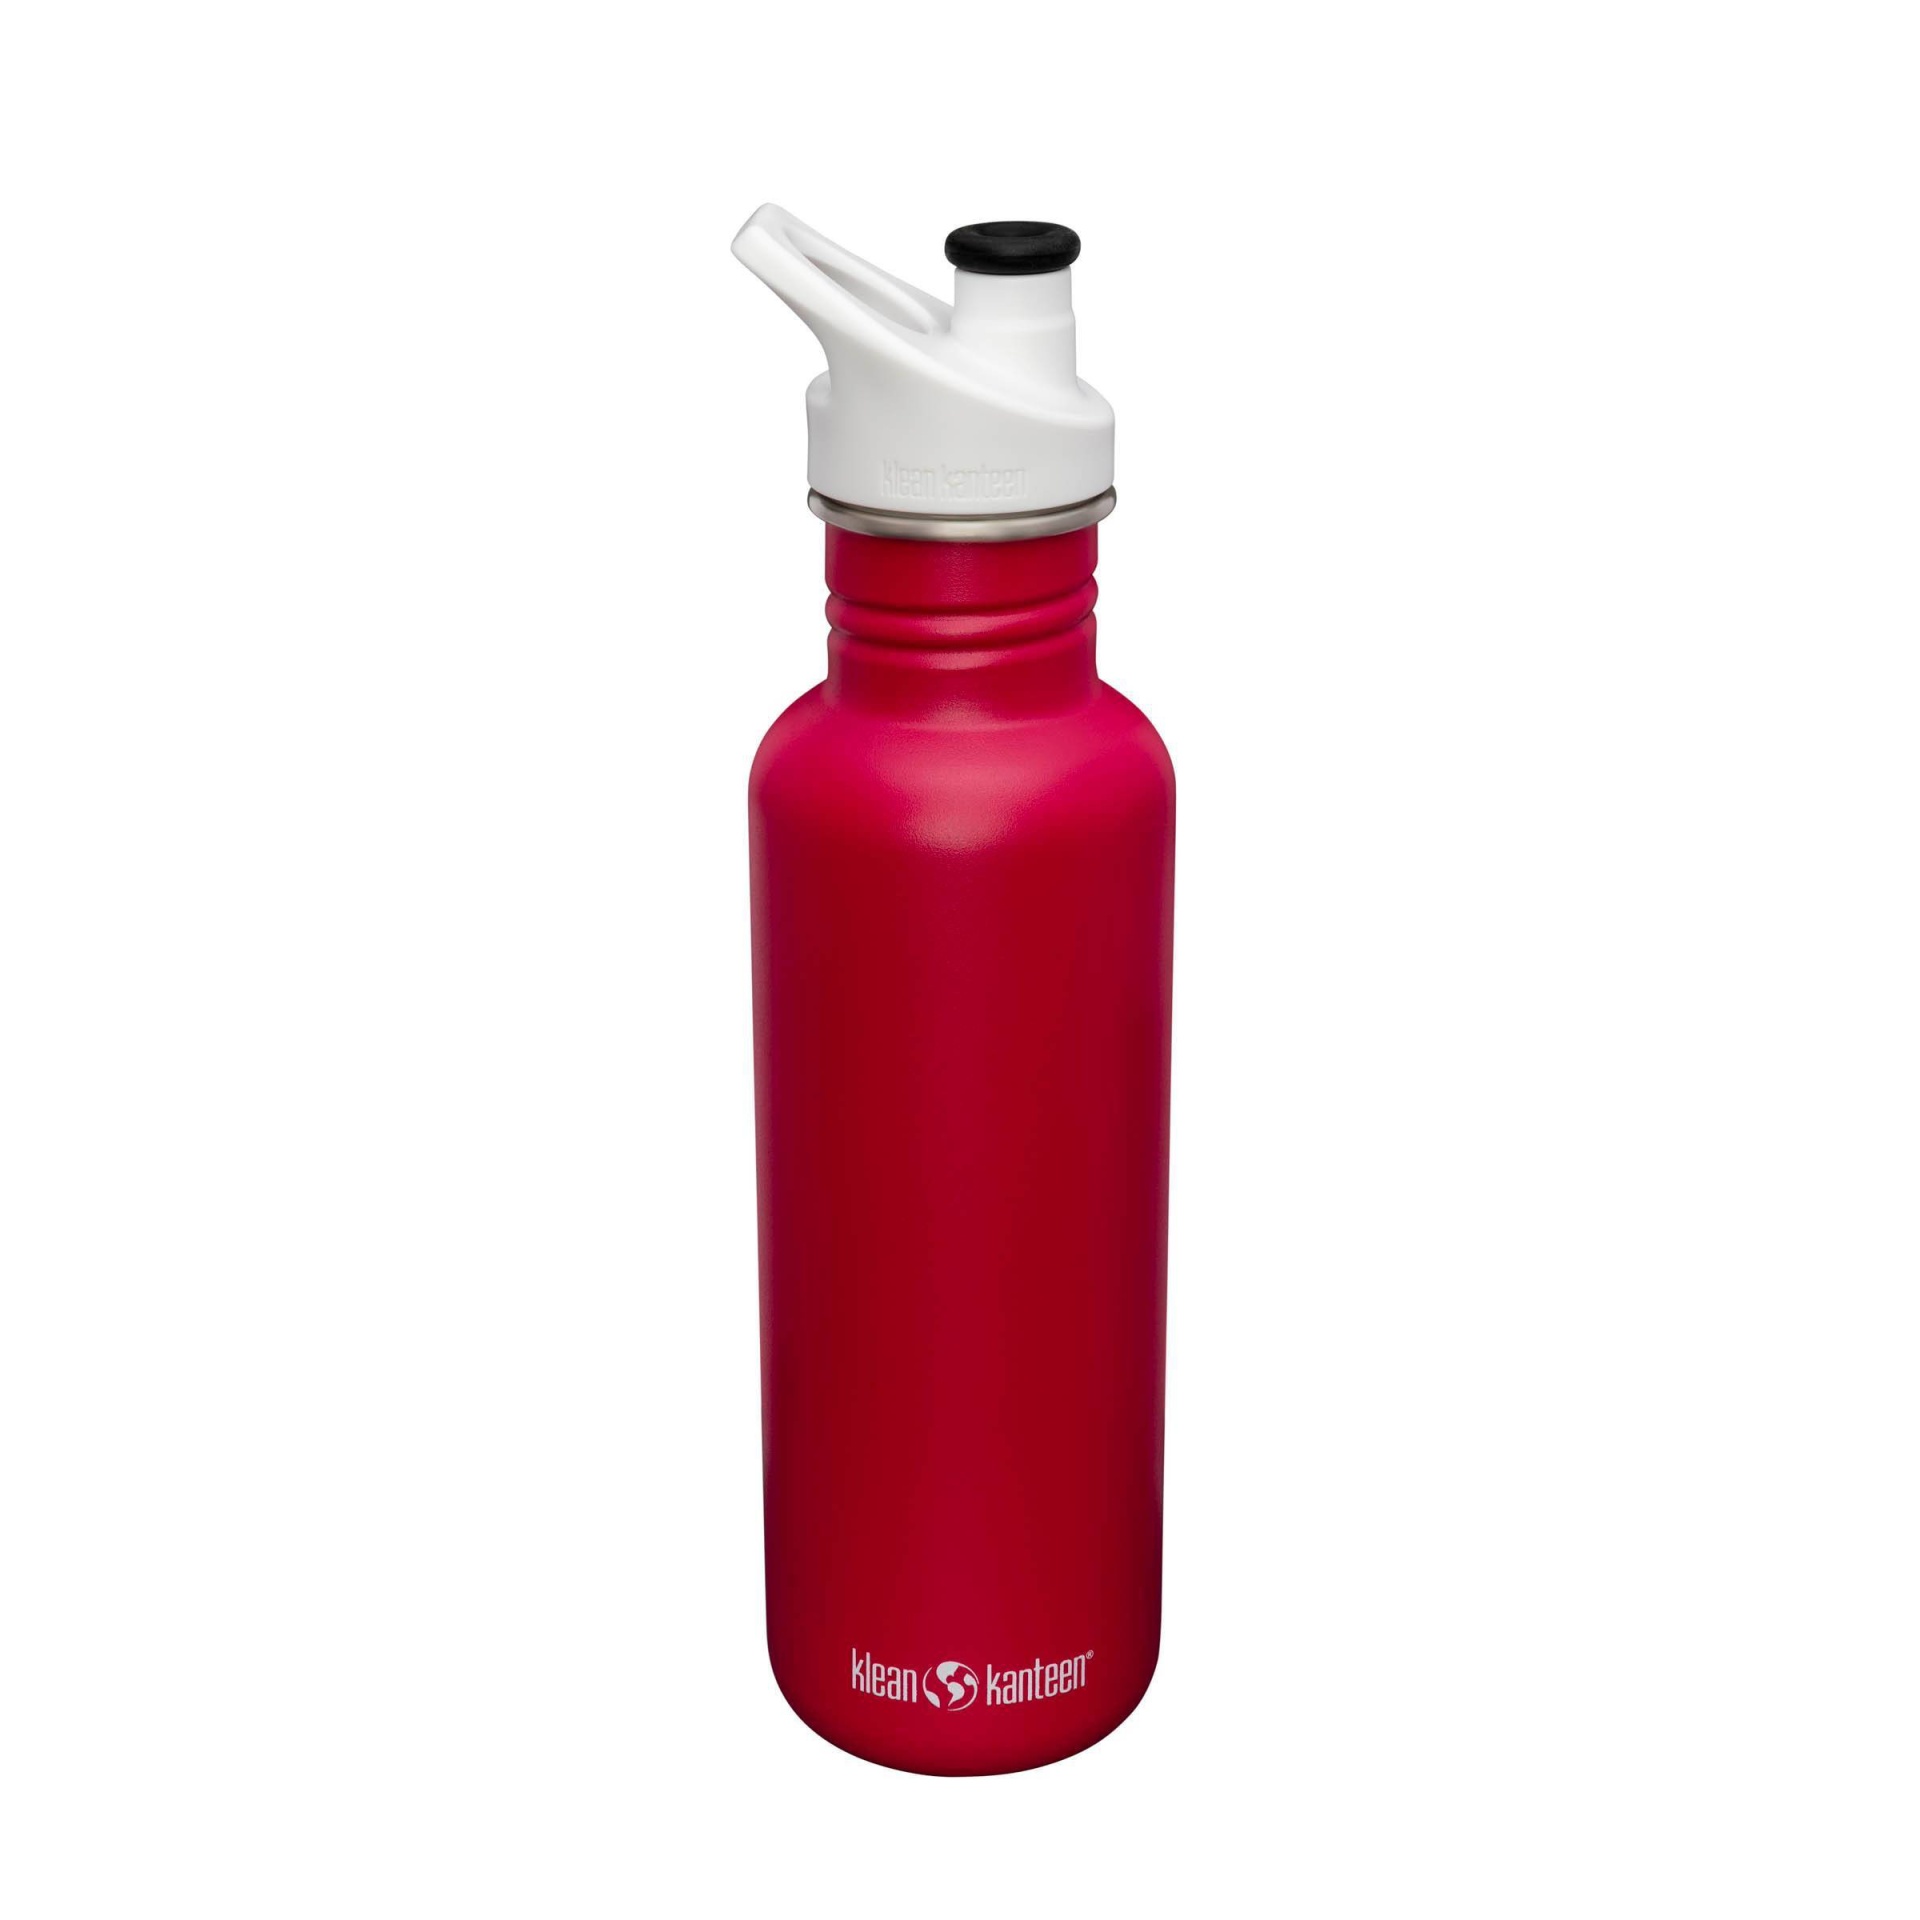  Klean Kanteen Classic Stainless Steel Bottle with